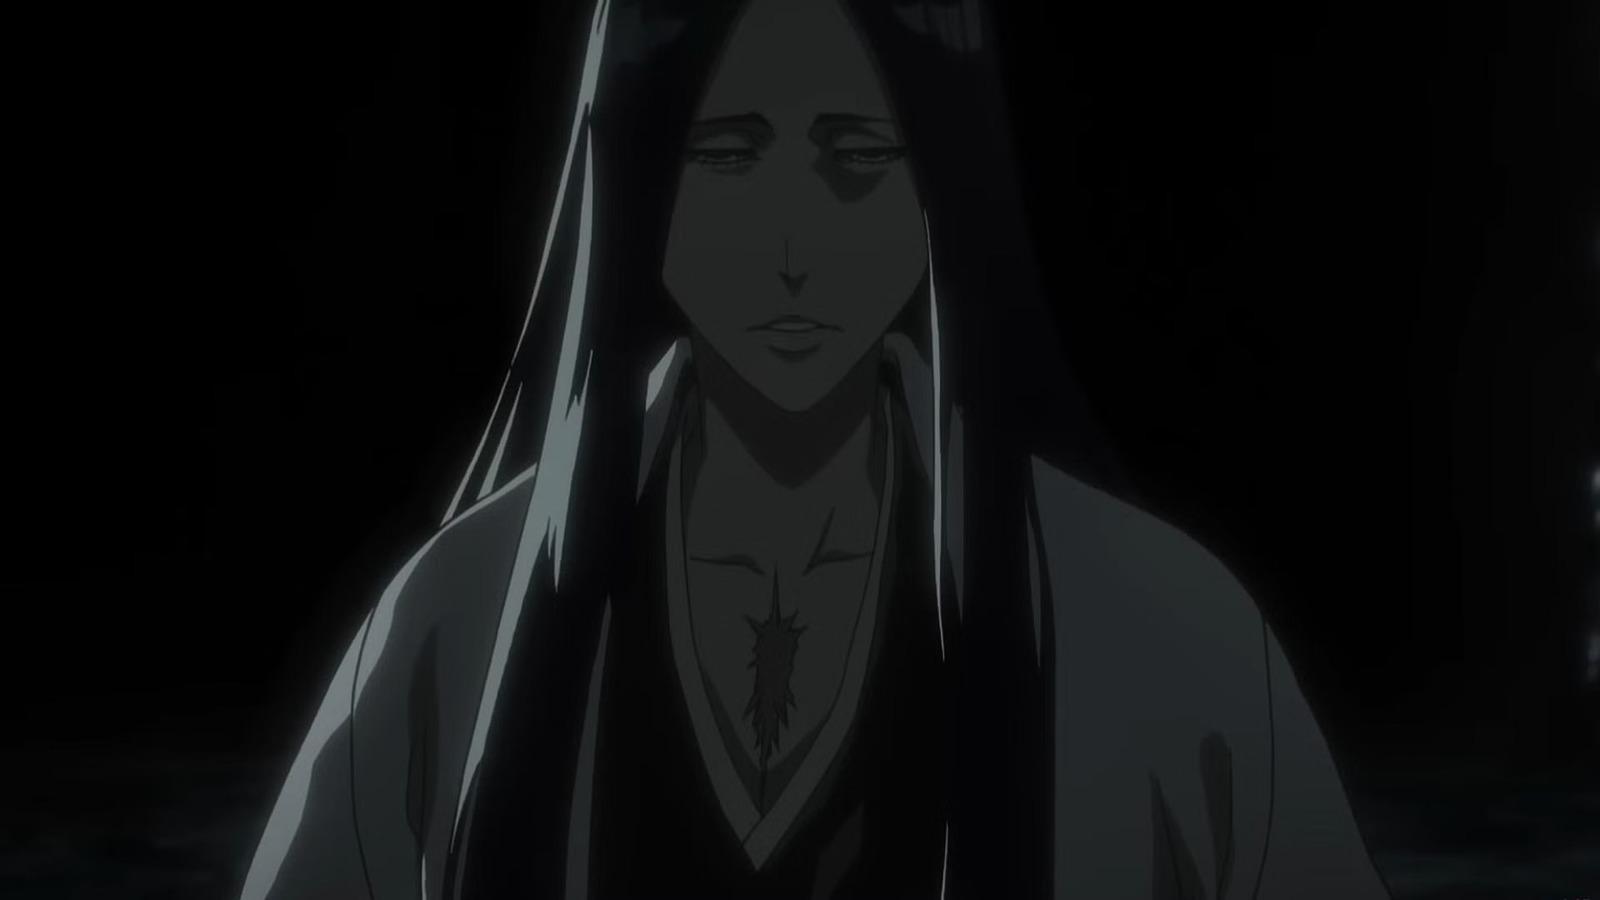 An image of Retsu Unohana when her true identity is revealed